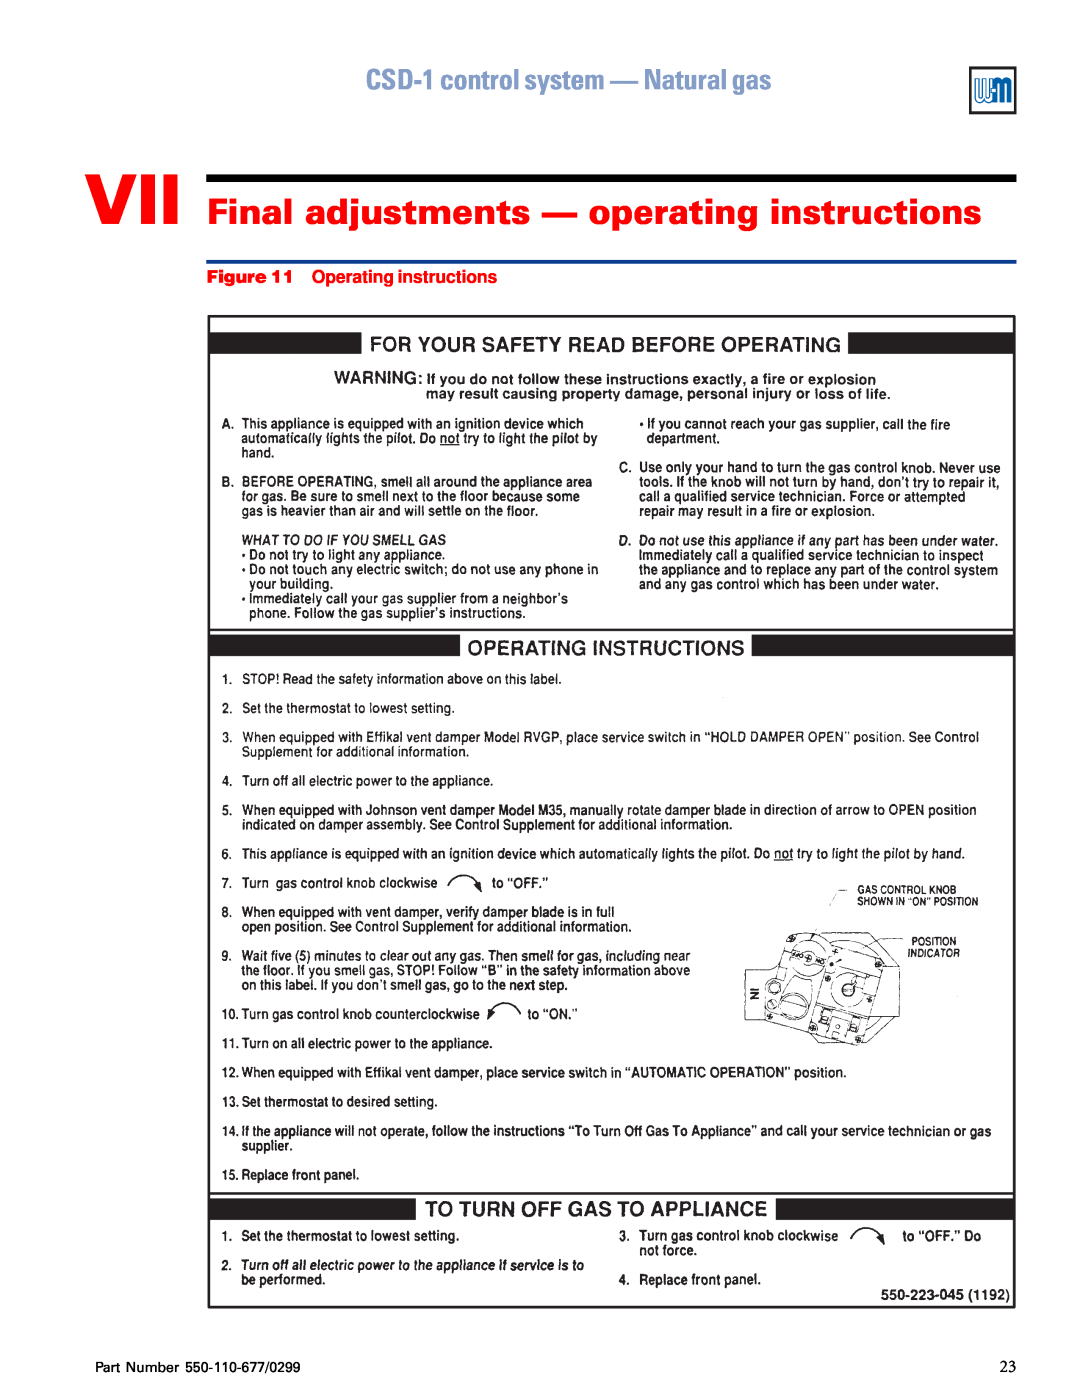 Weil-McLain EGH-125, EGH-105 manual VII Final adjustments - operating instructions, CSD-1control system - Natural gas 